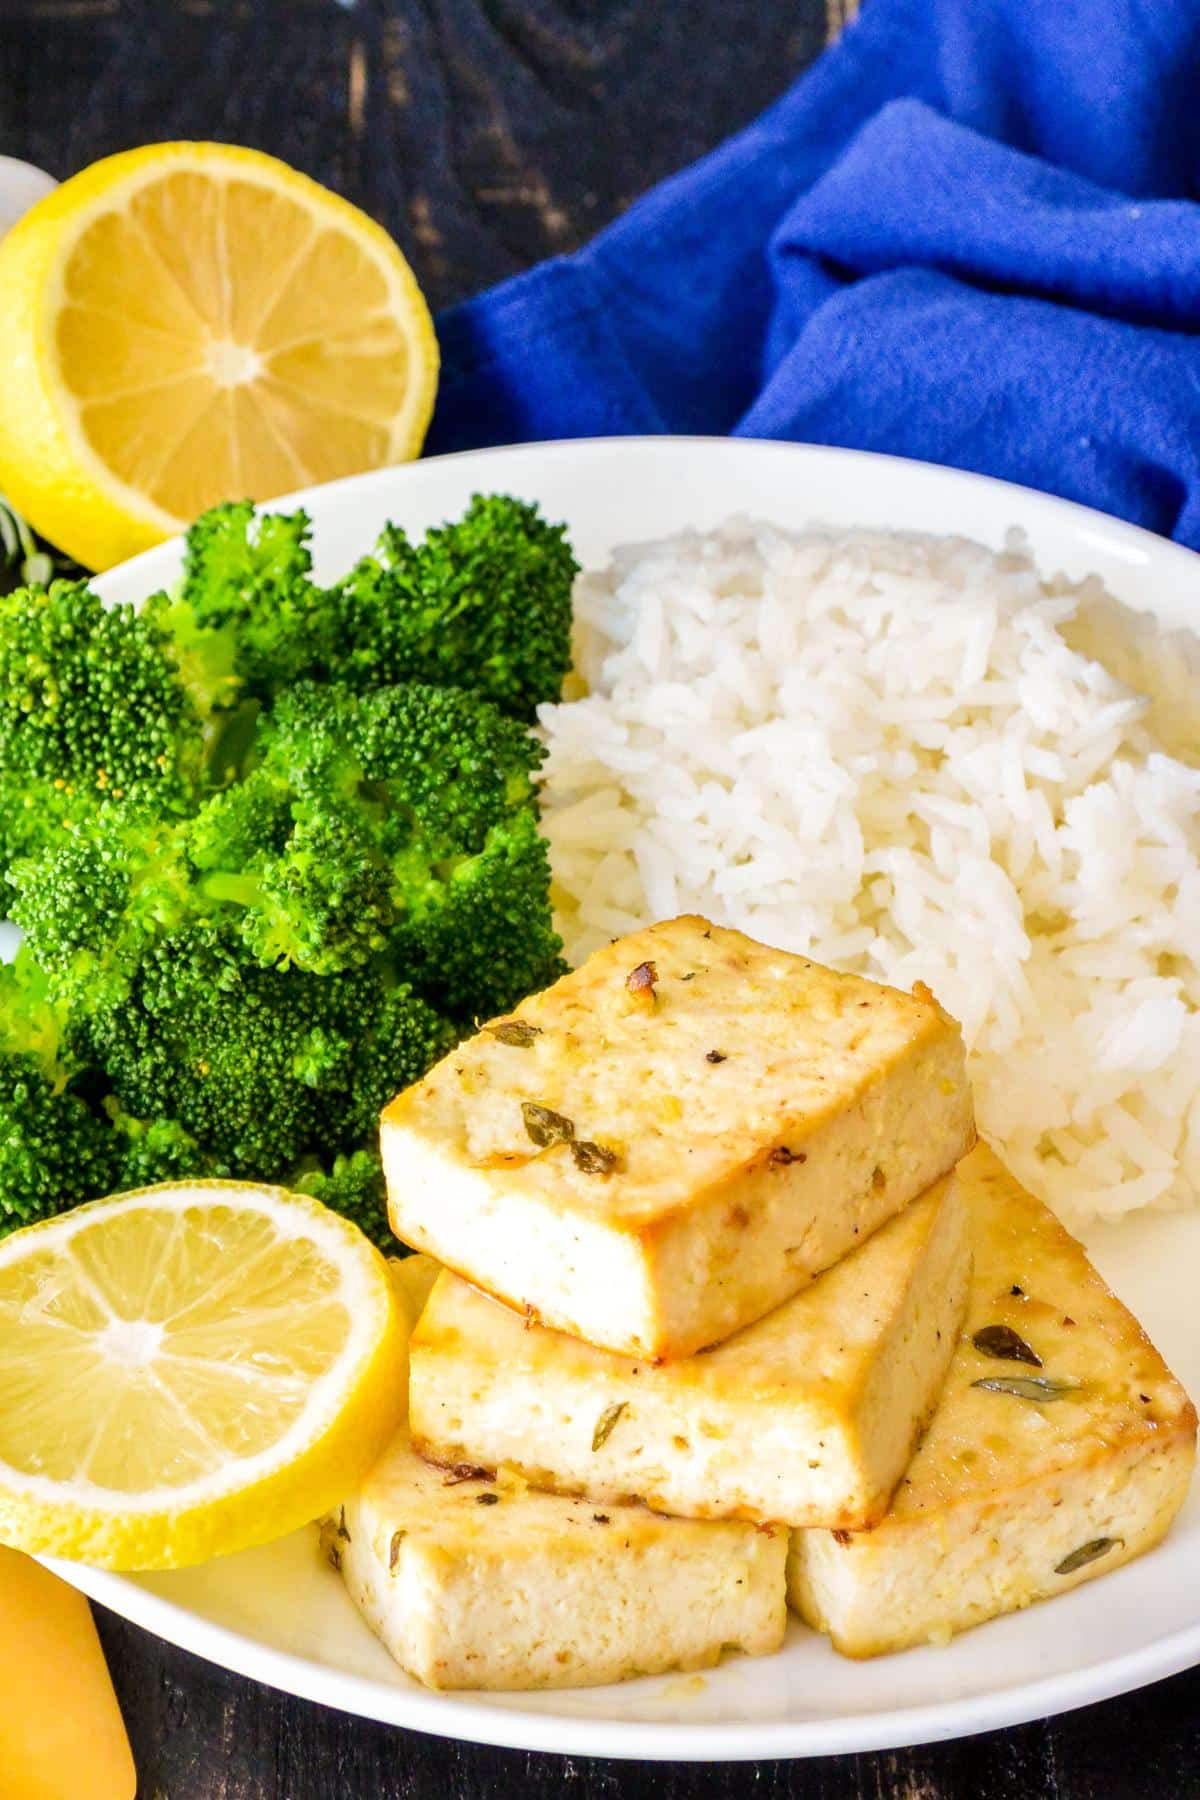 Tofu on a dinner plate with a lemon slice, streamed broccoli, and rice.